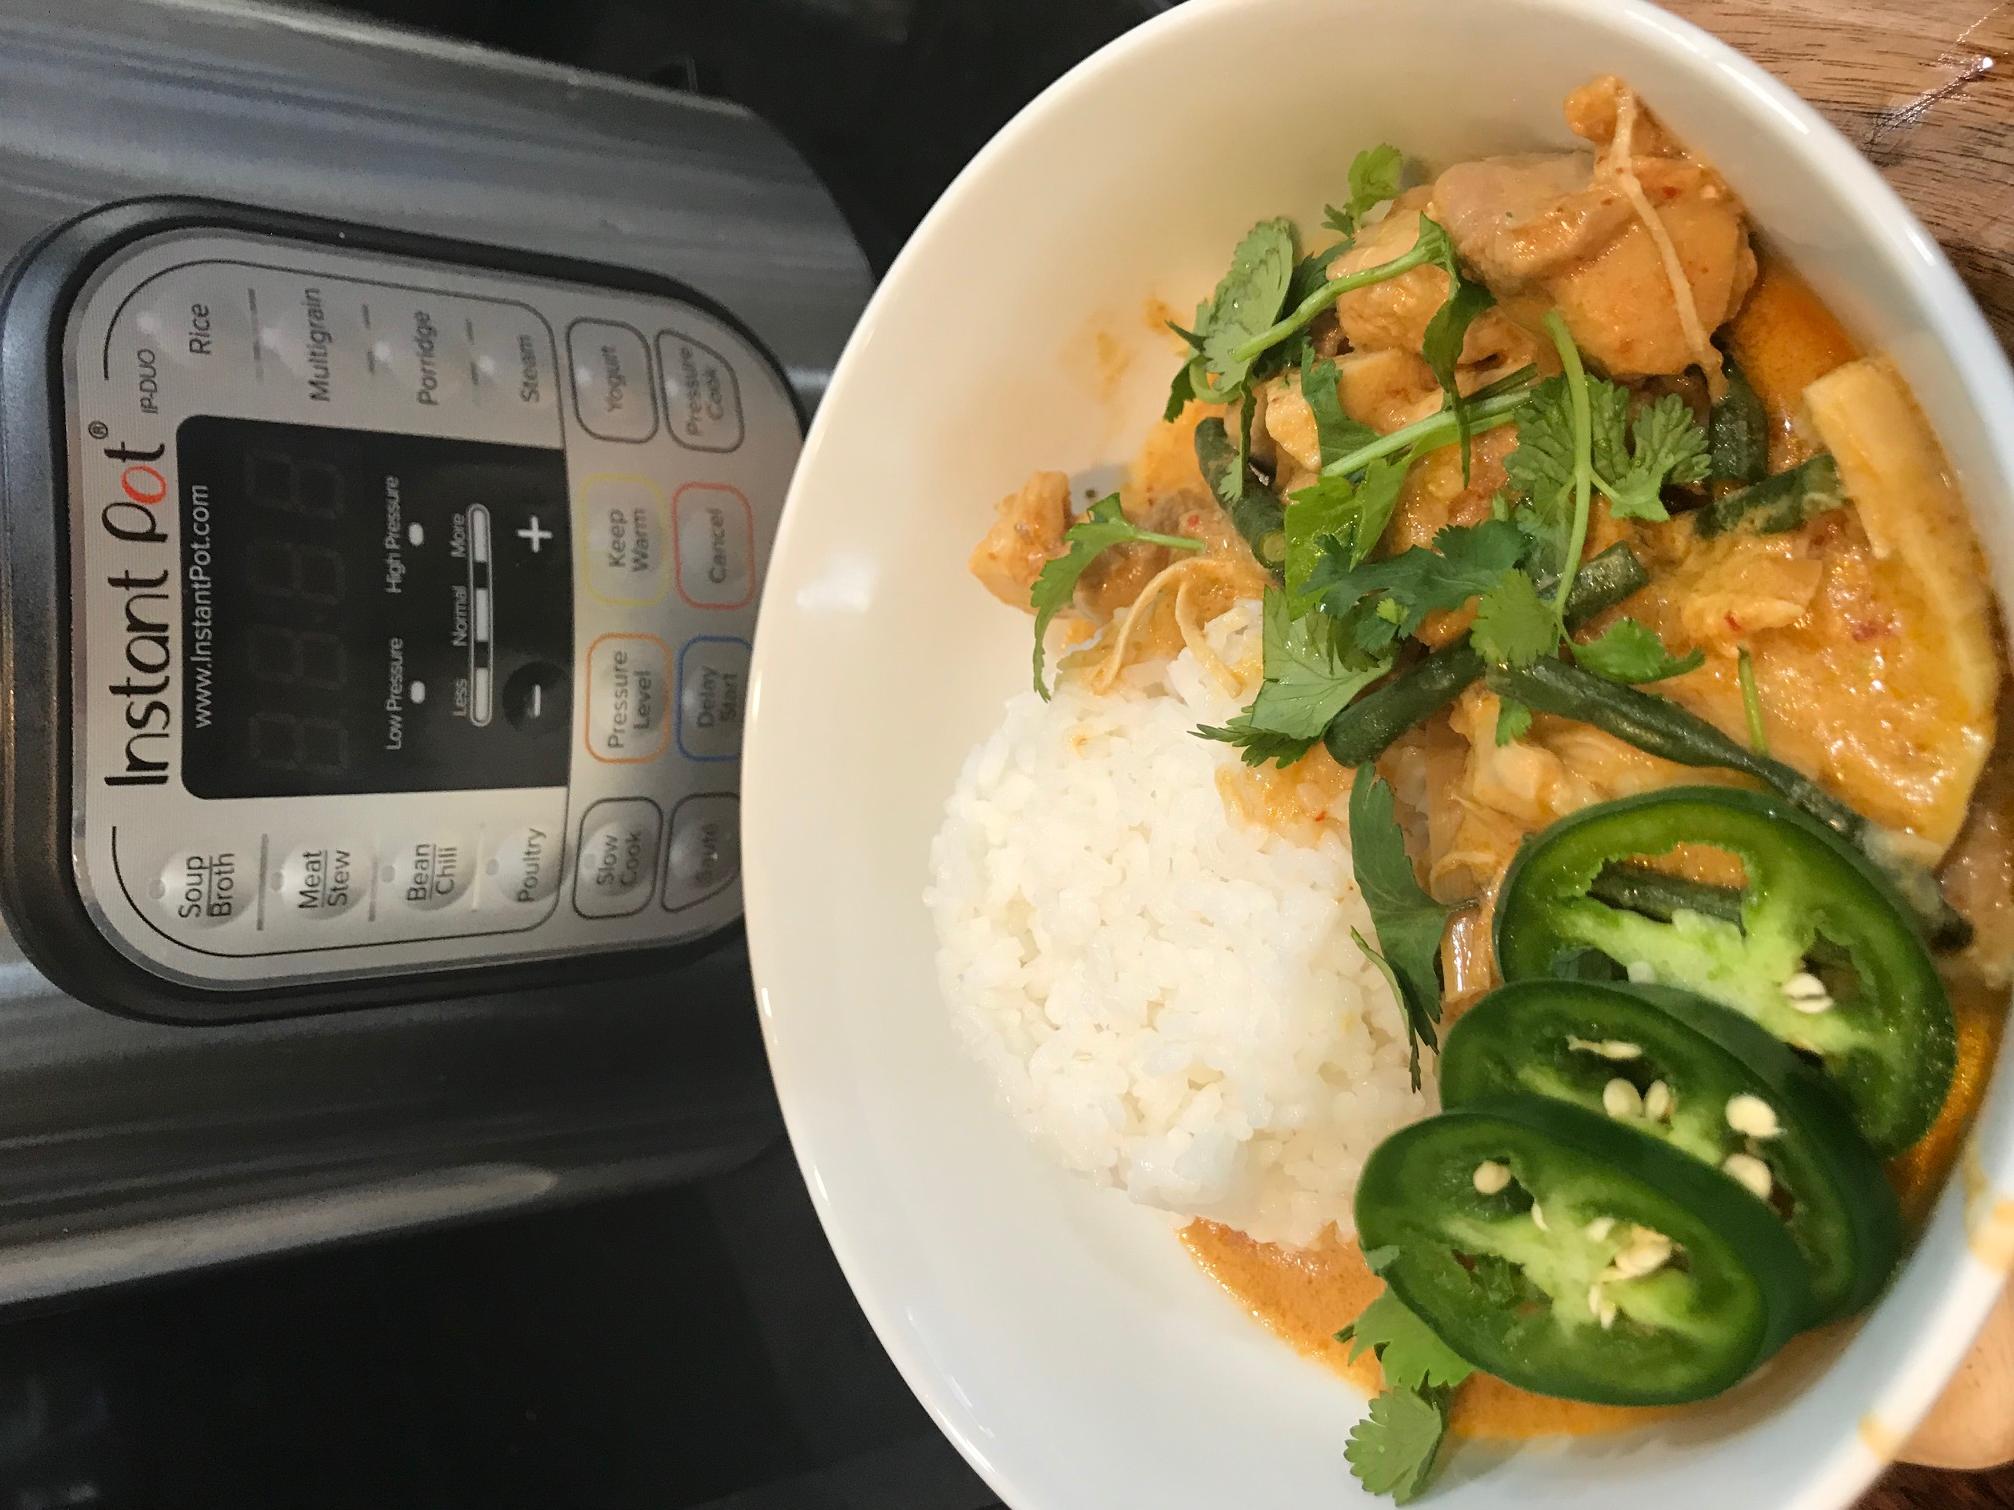 Spicy & Satisfying: Homemade Chicken Red Curry Recipe